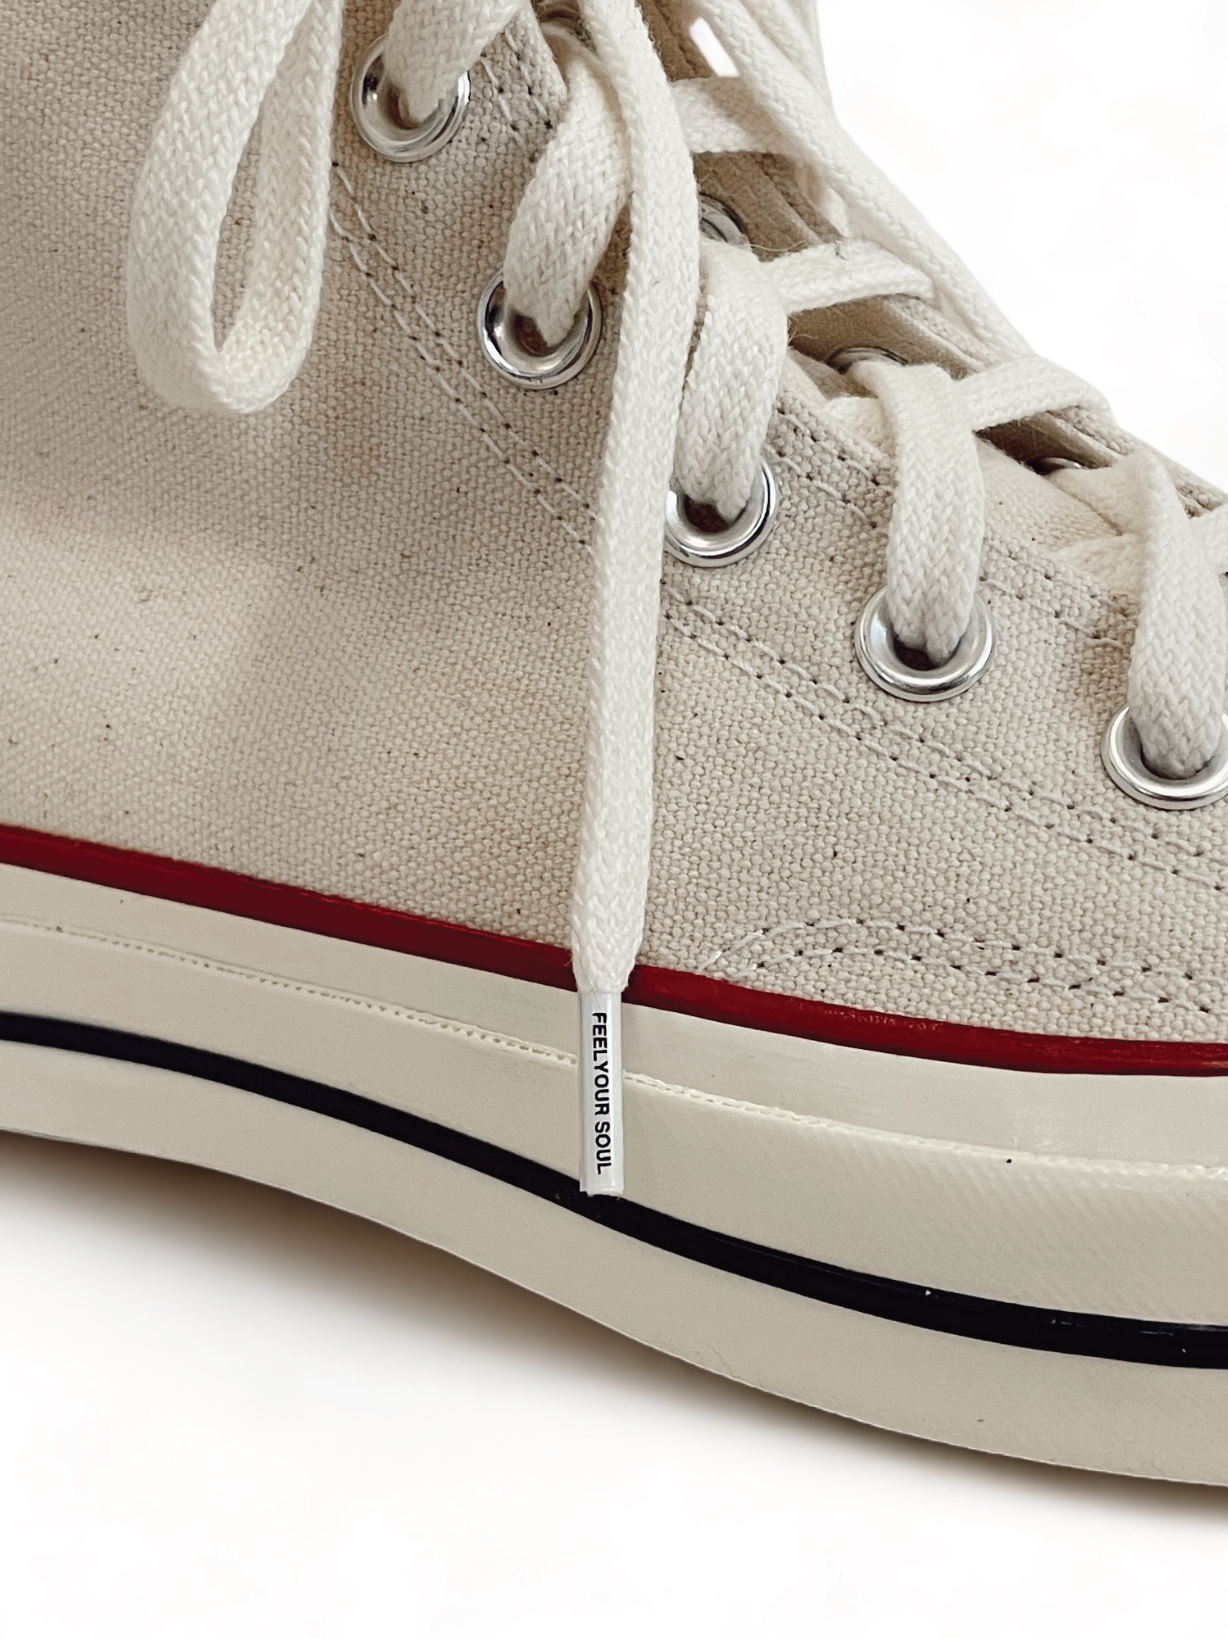 Replacement Converse Shoe Laces - FEEL YOUR SOUL